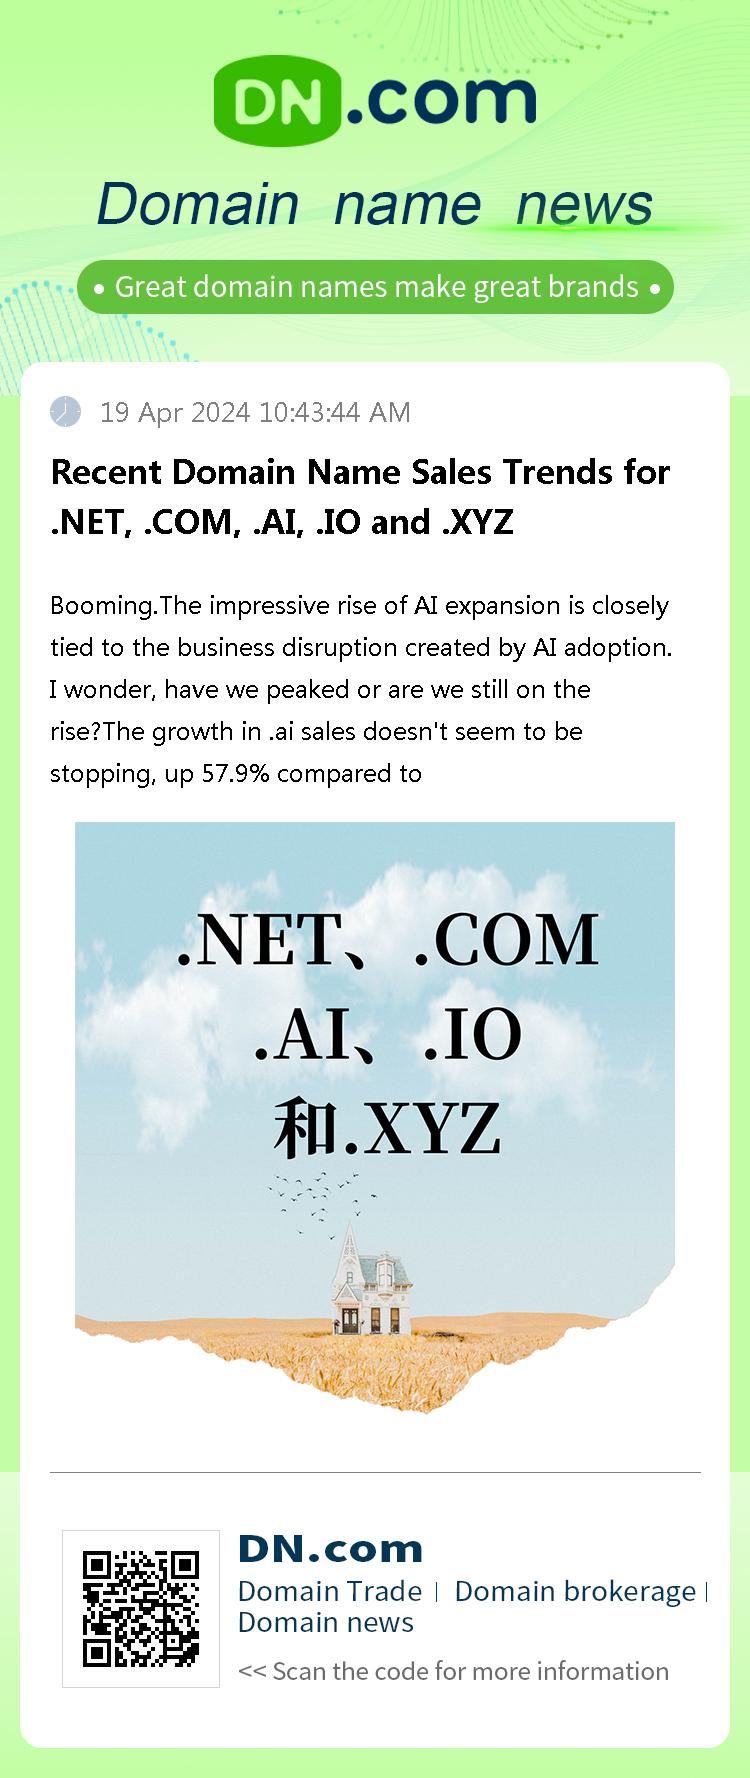 Recent Domain Name Sales Trends for .NET, .COM, .AI, .IO and .XYZ